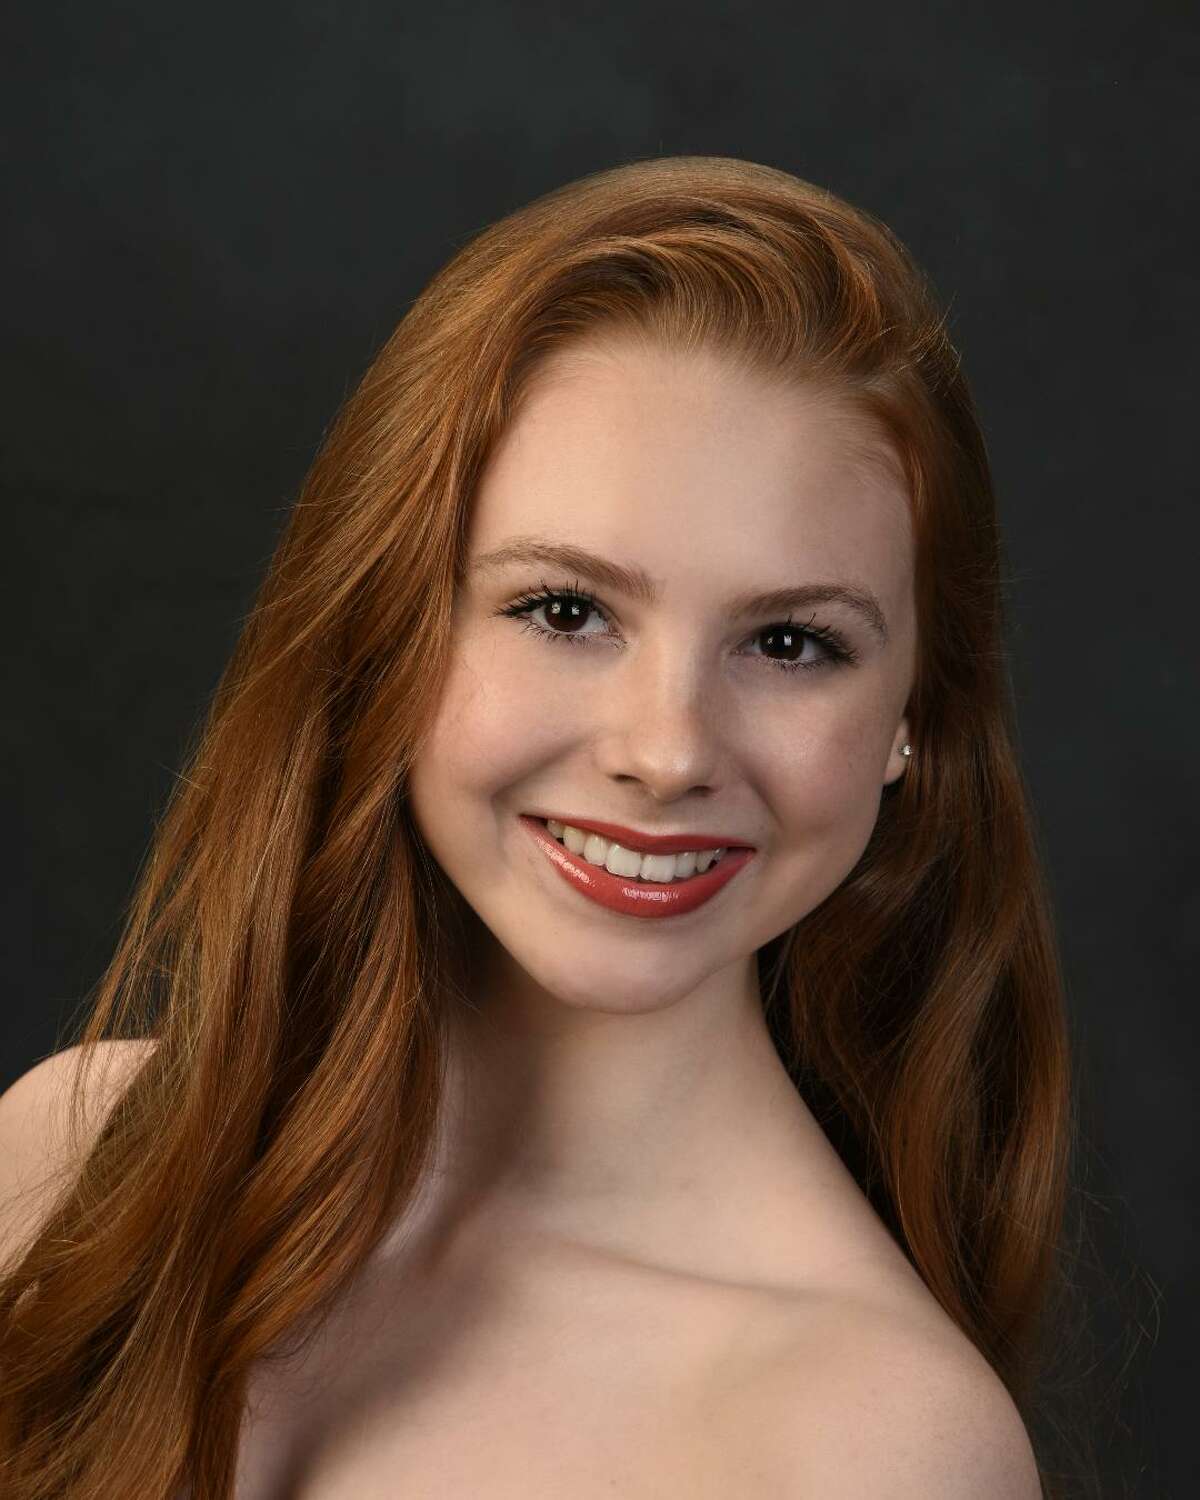 Friendswood resident Madison Taylor, 18, portrays the title role in Bay Area Houston Ballet & Theatre's production of "Giselle."